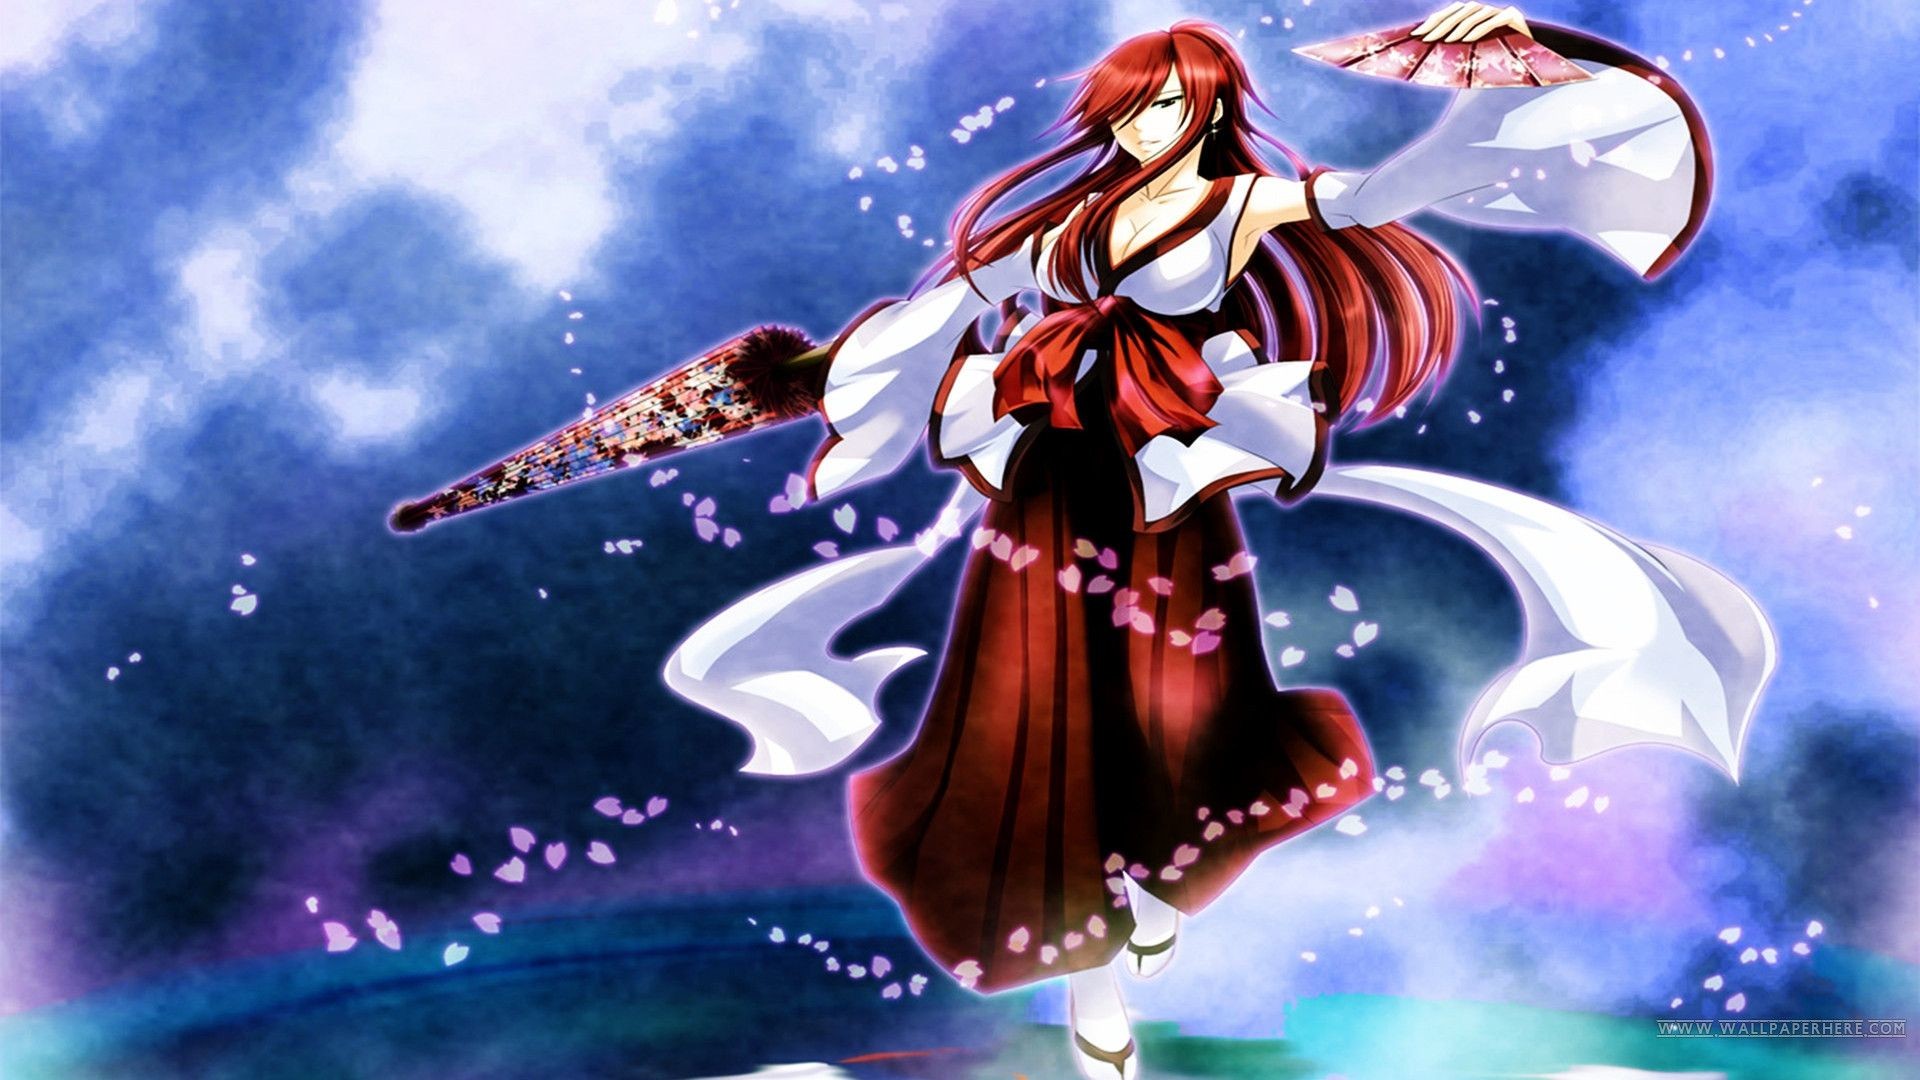 1920x1080 Erza Scarlet Wallpaper and Background